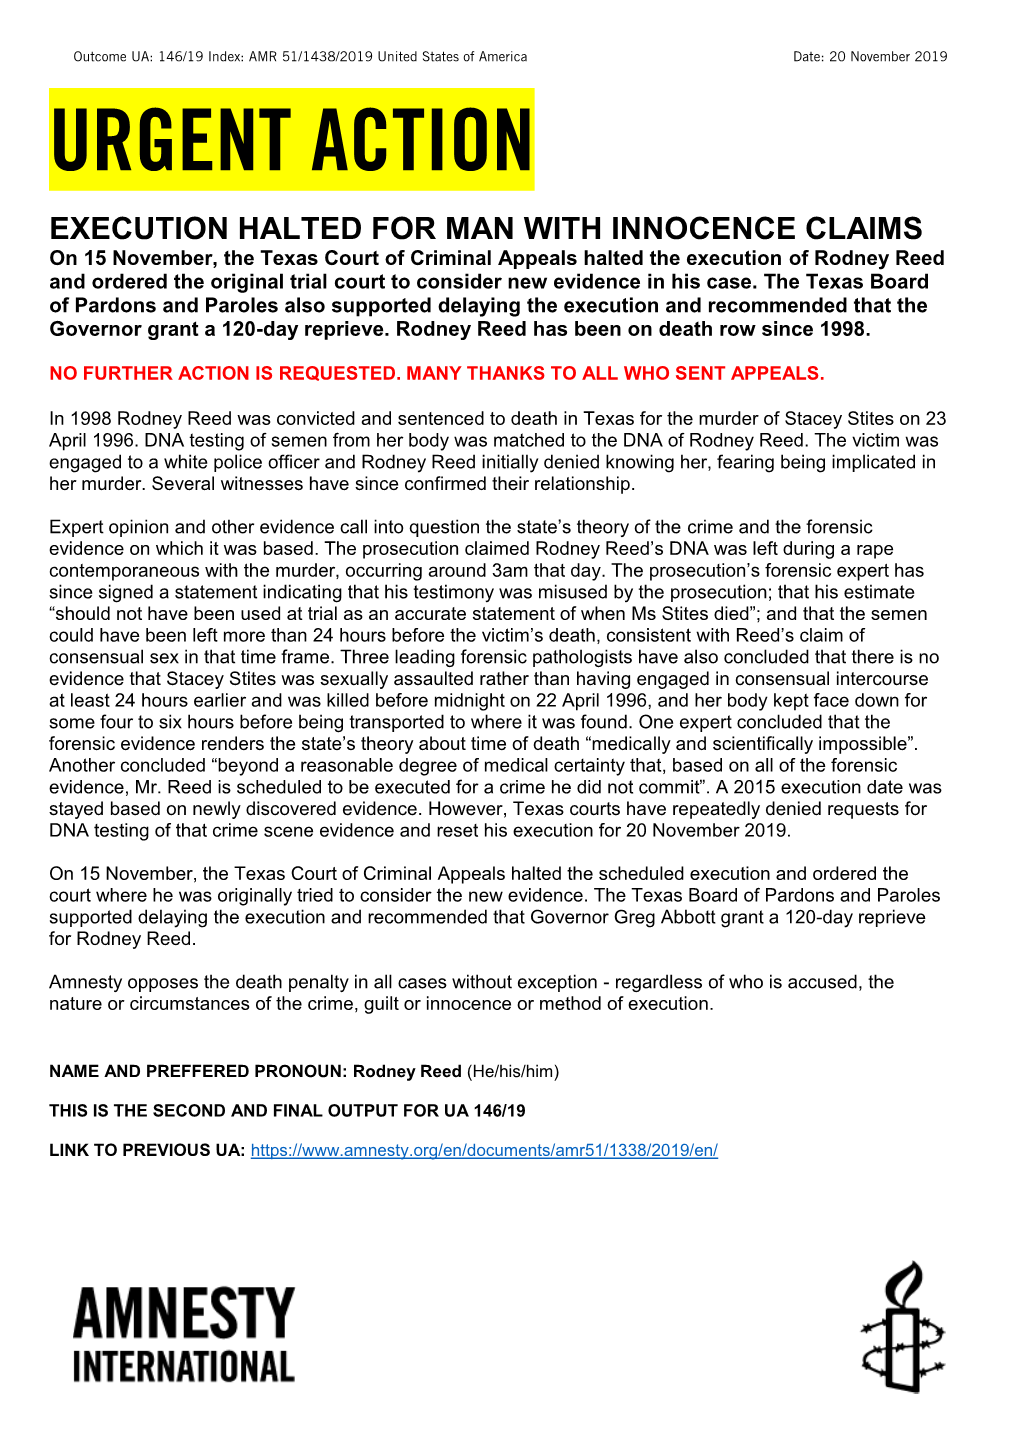 USA: Execution Halted for Man with Innocence Claims: Rodney Reed